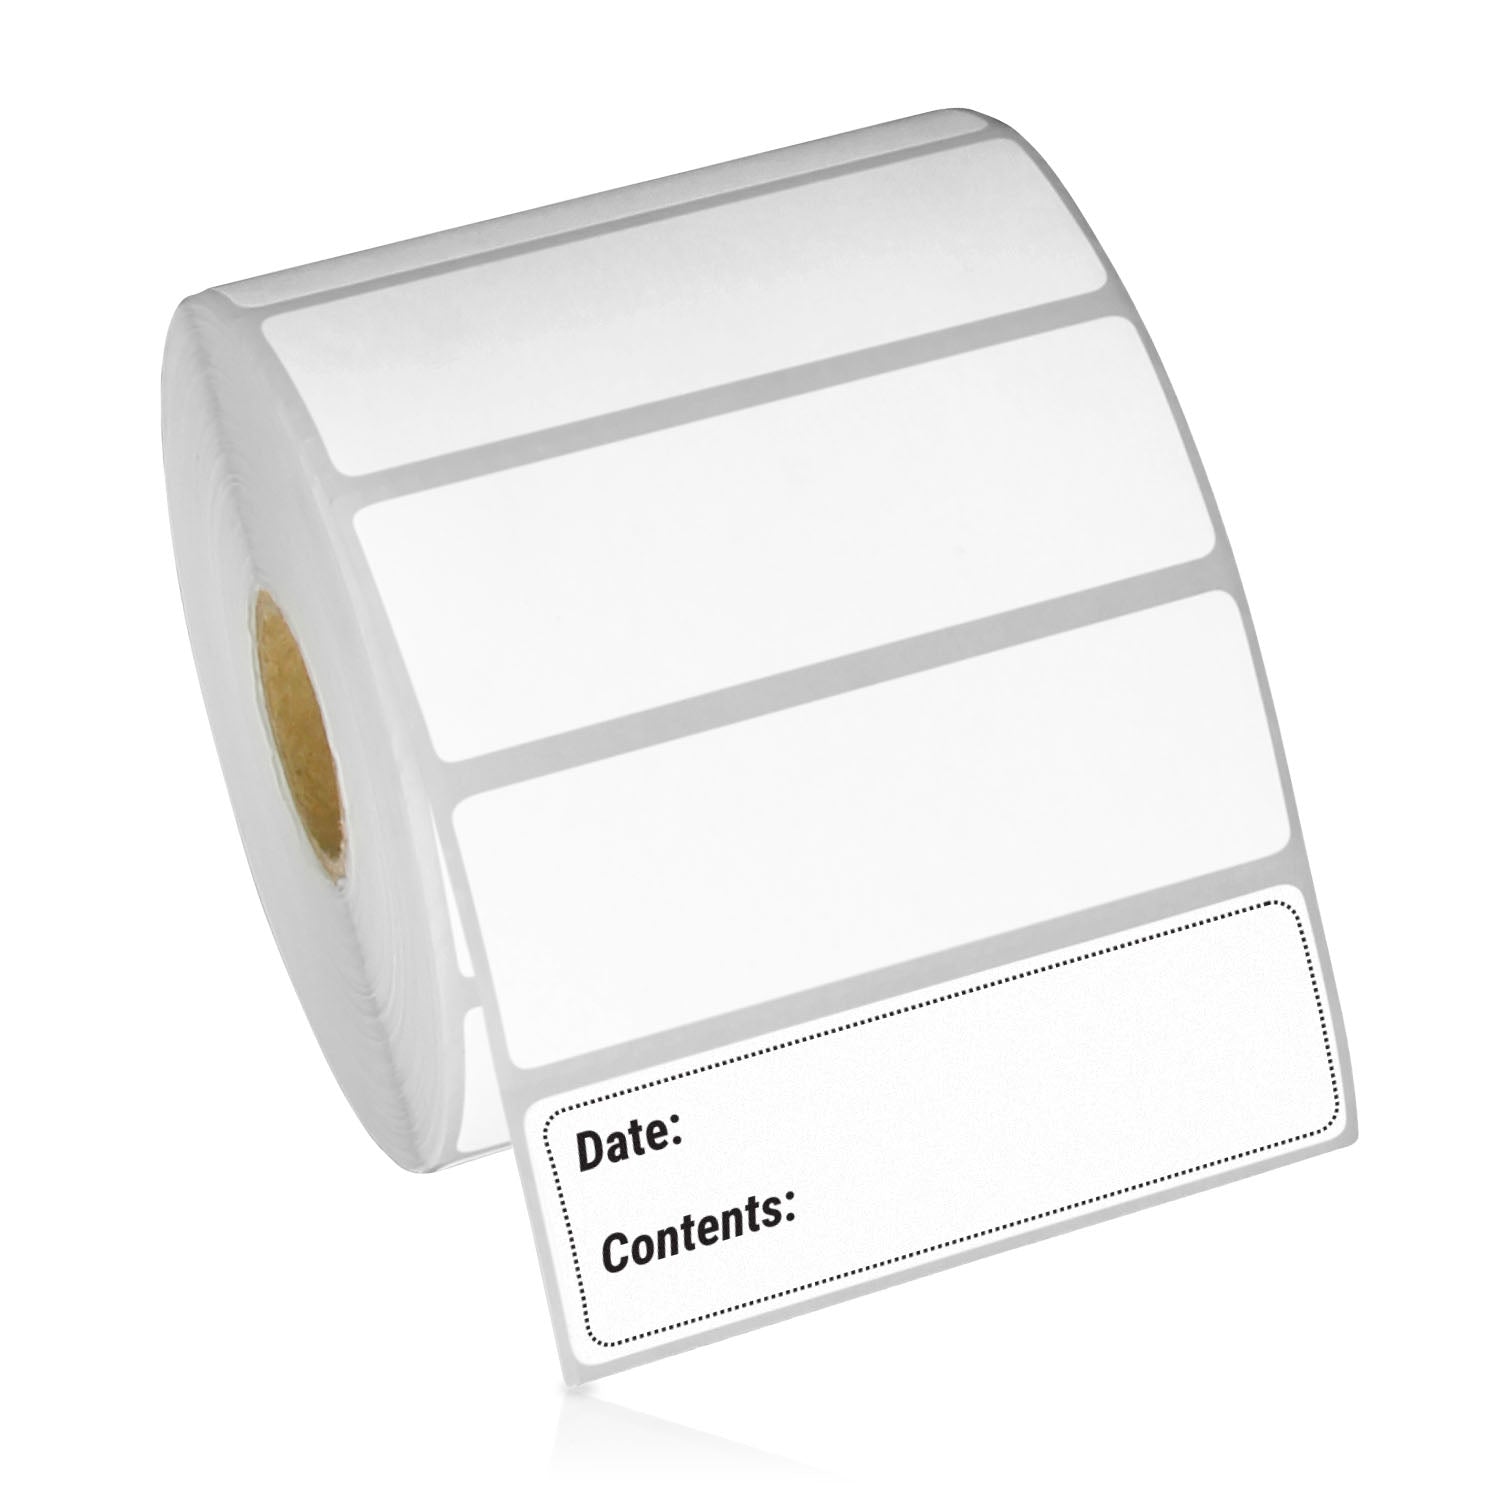  OfficeSmartLabels ZR1200100 Removable 2 x 1 Inch